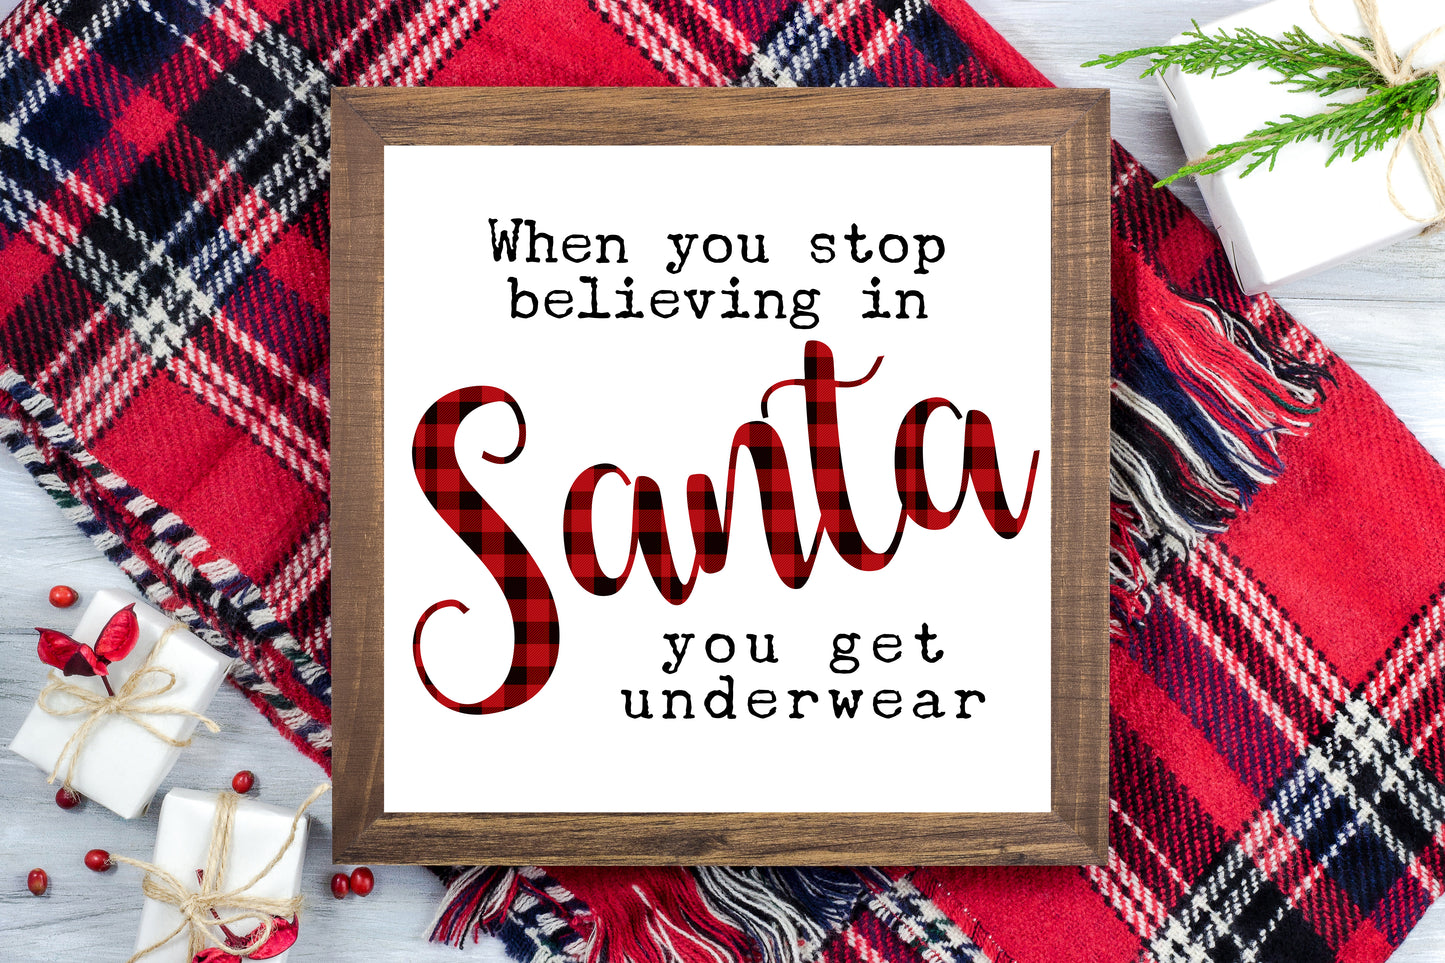 When you stop believing in Santa you get underwear - Funny Christmas Printable Sign - Digital File